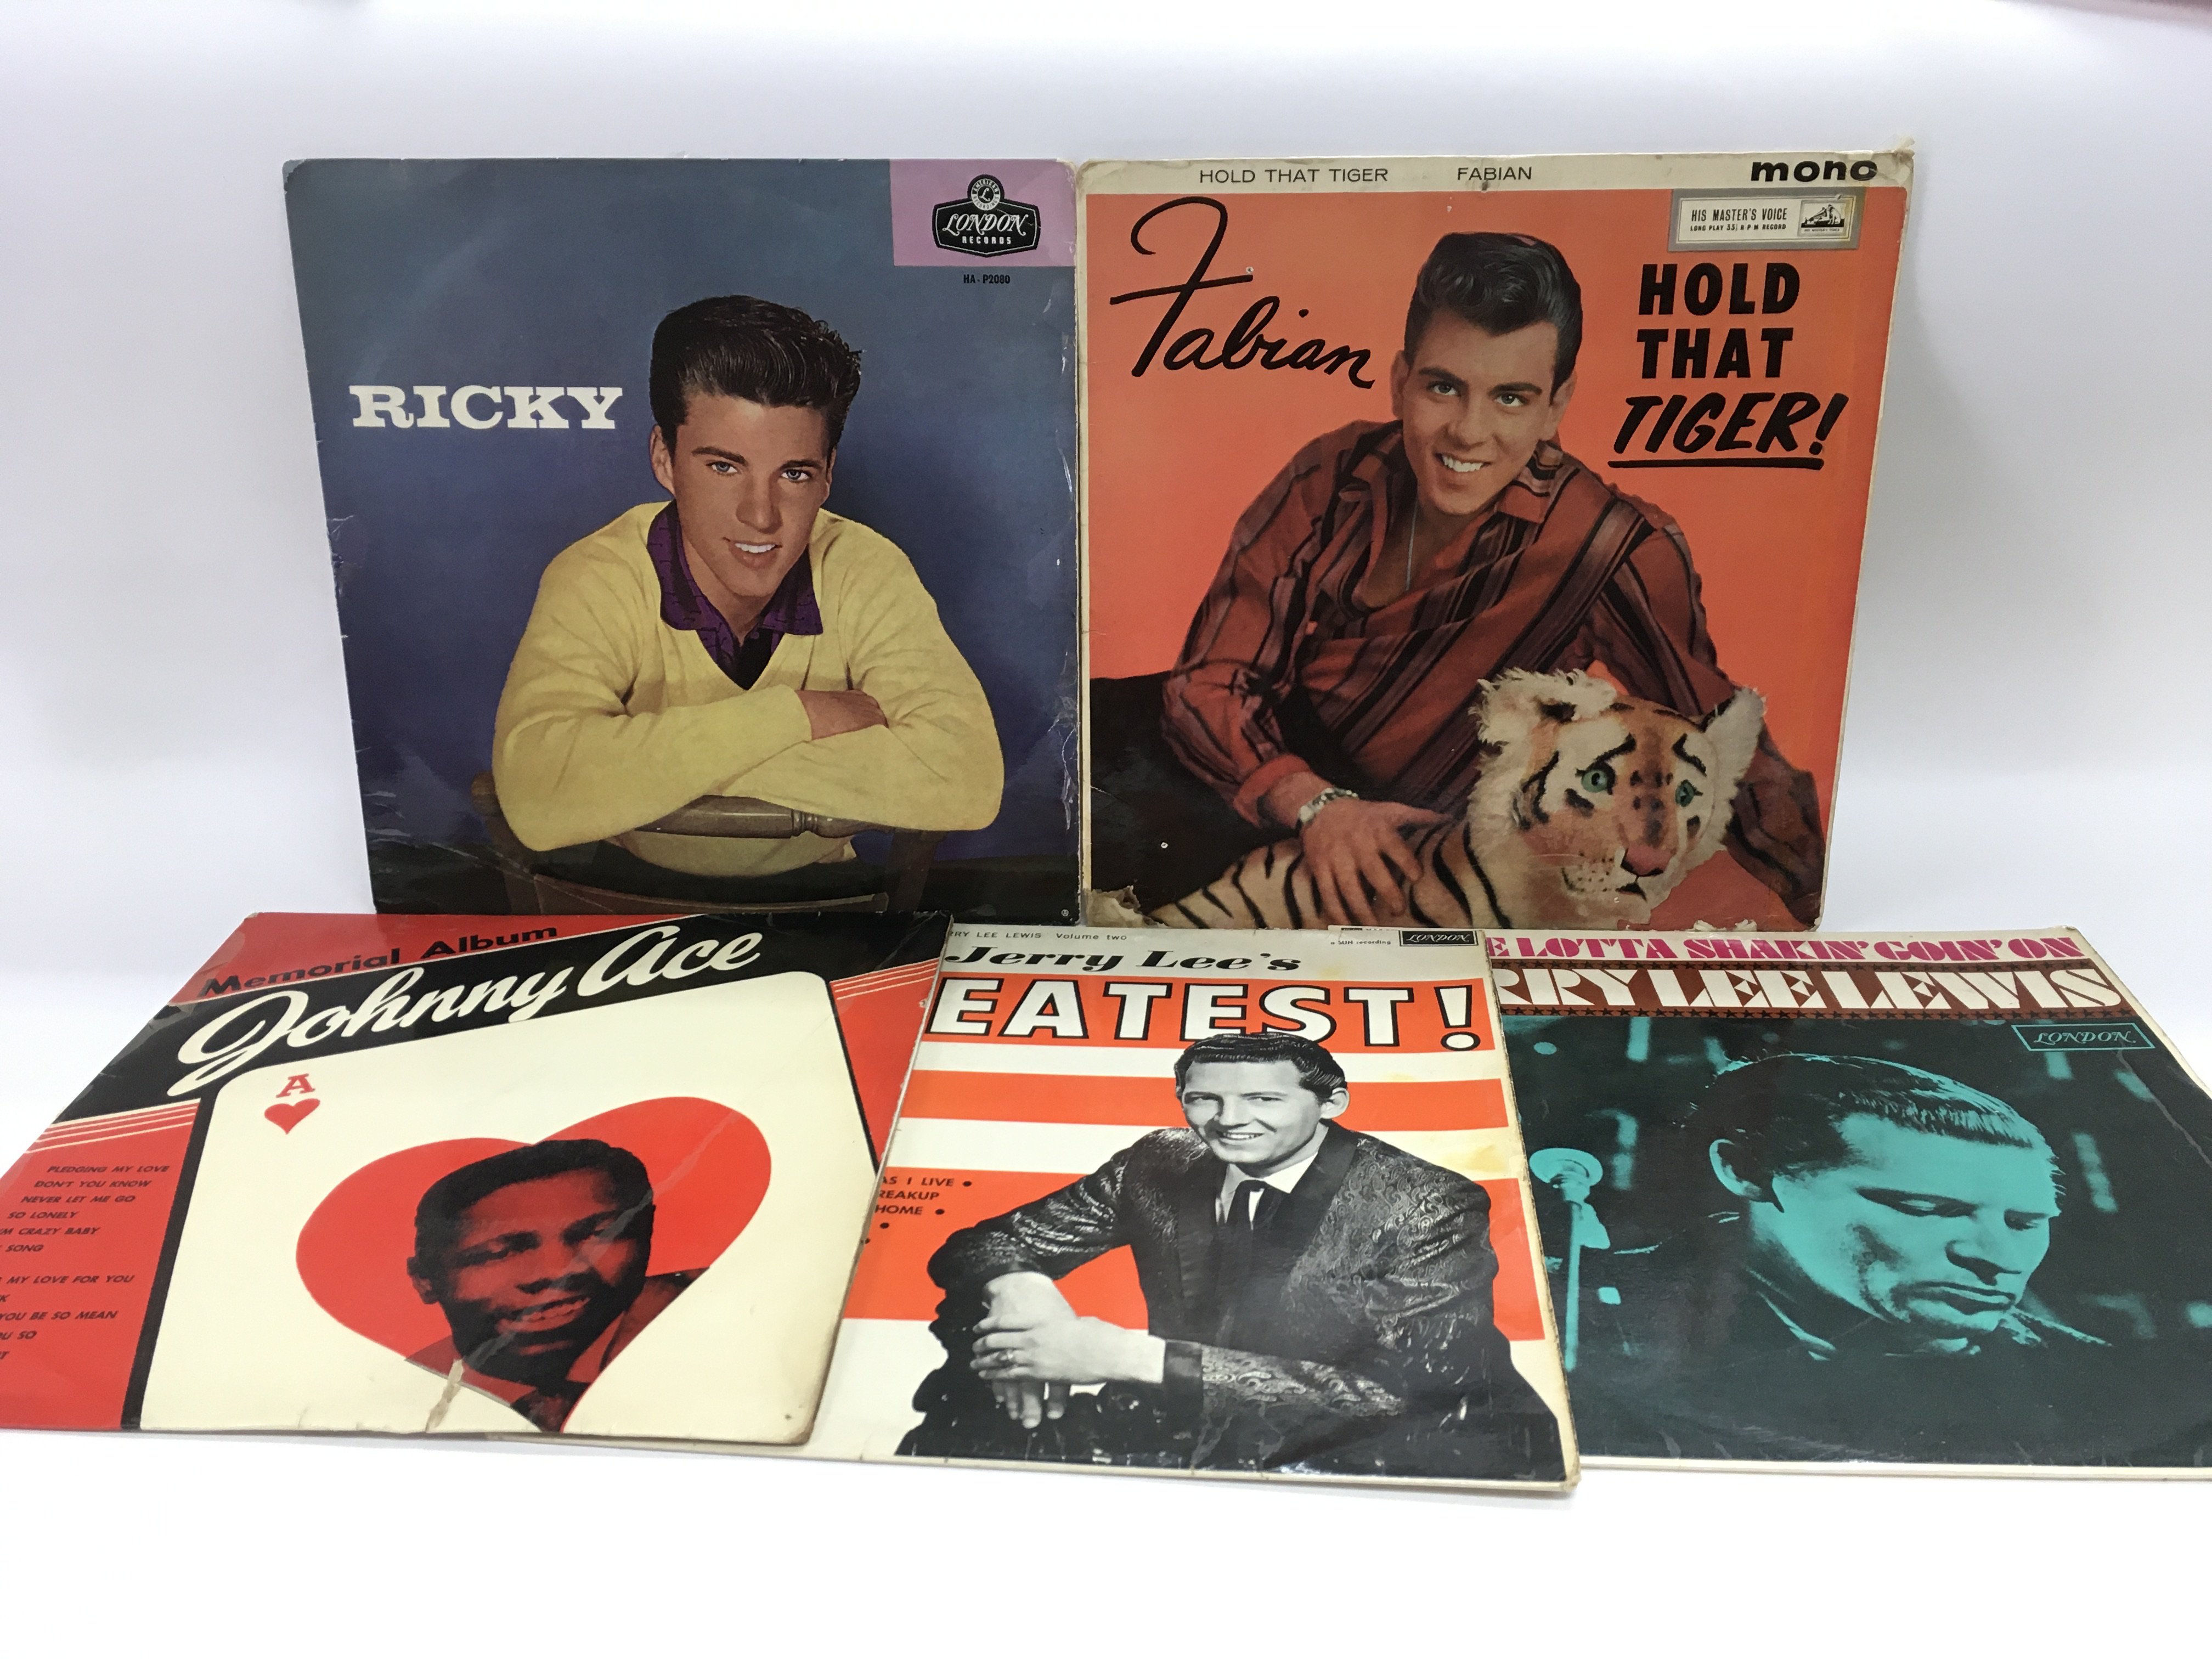 Five rock n roll LPs by various artists including